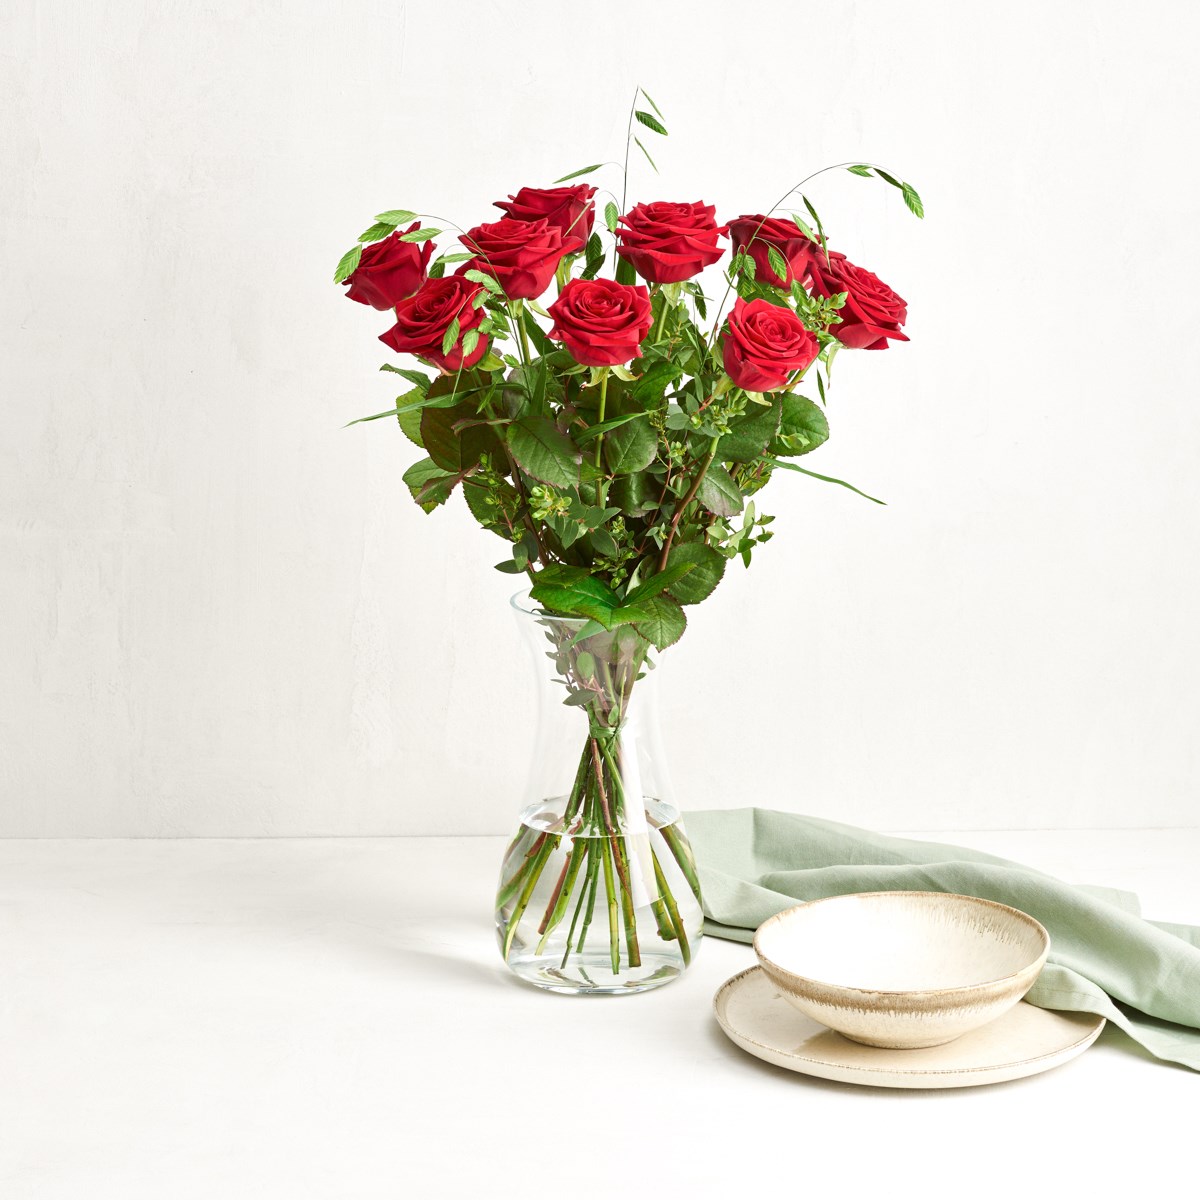 product image for The red roses